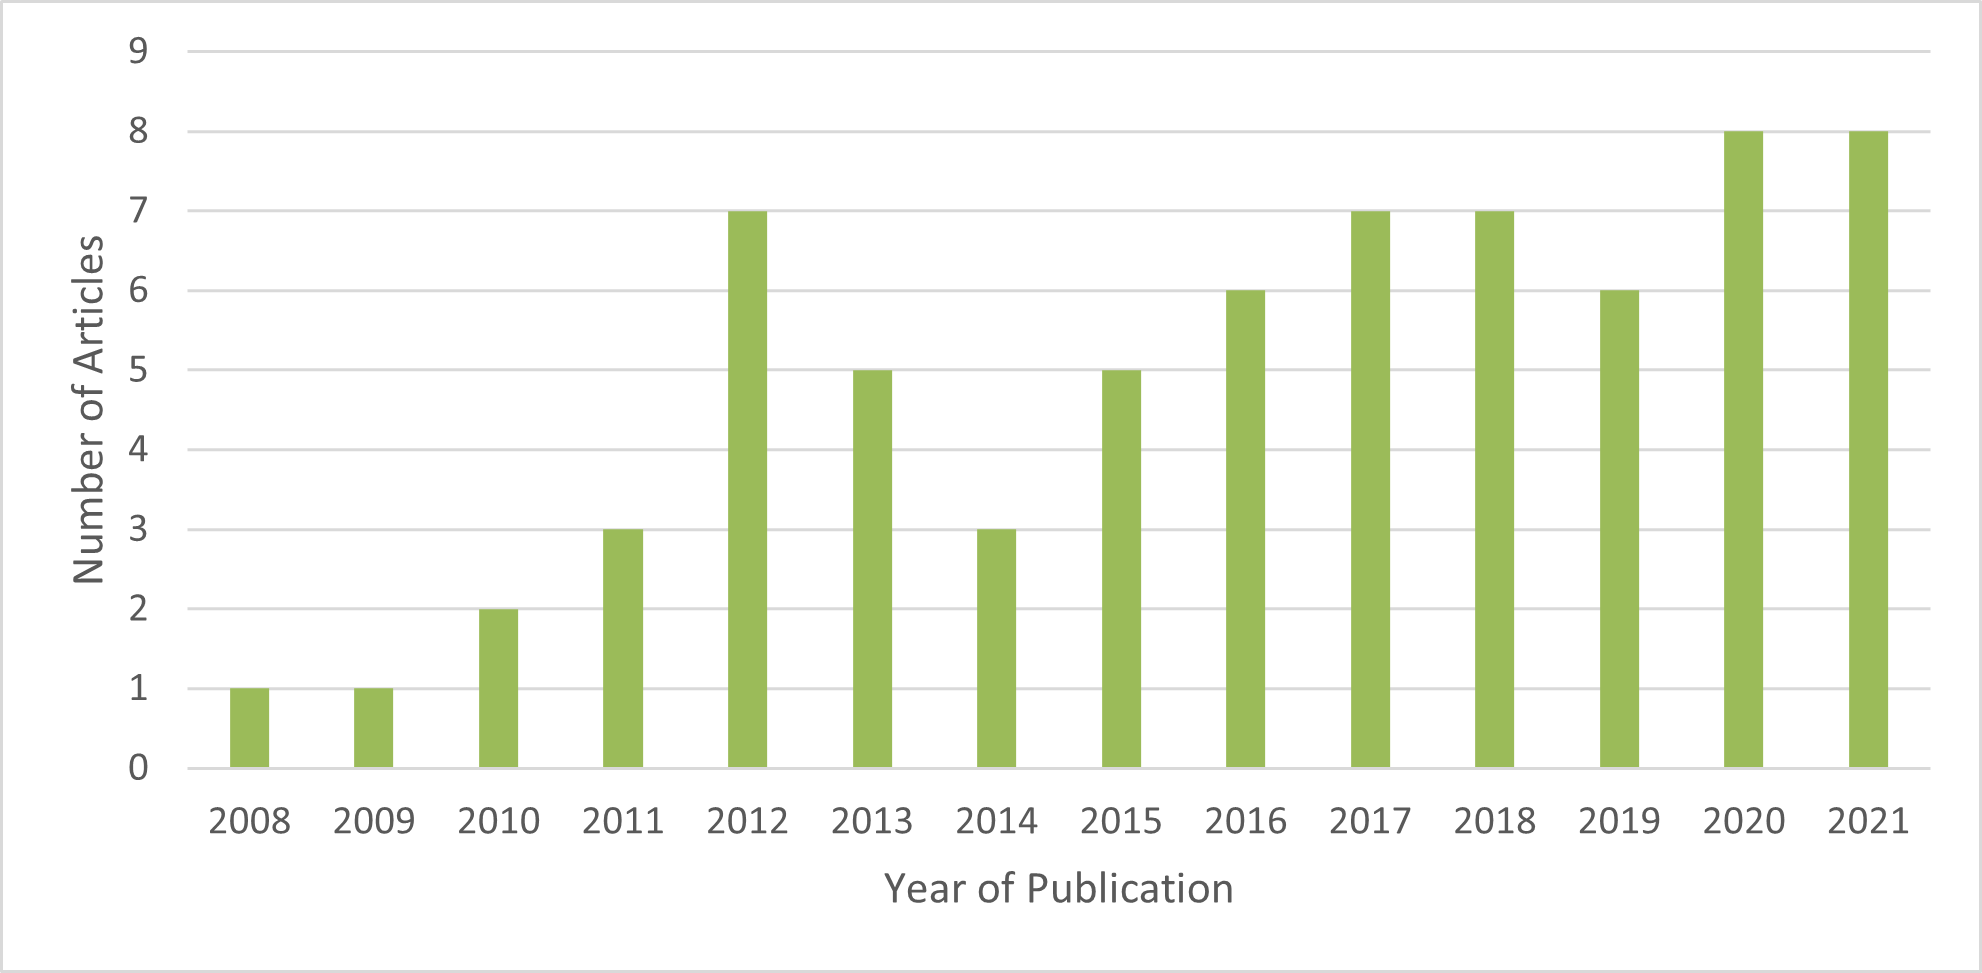 Figure 5: Year of publication of articles related to ethno-racial minority youth